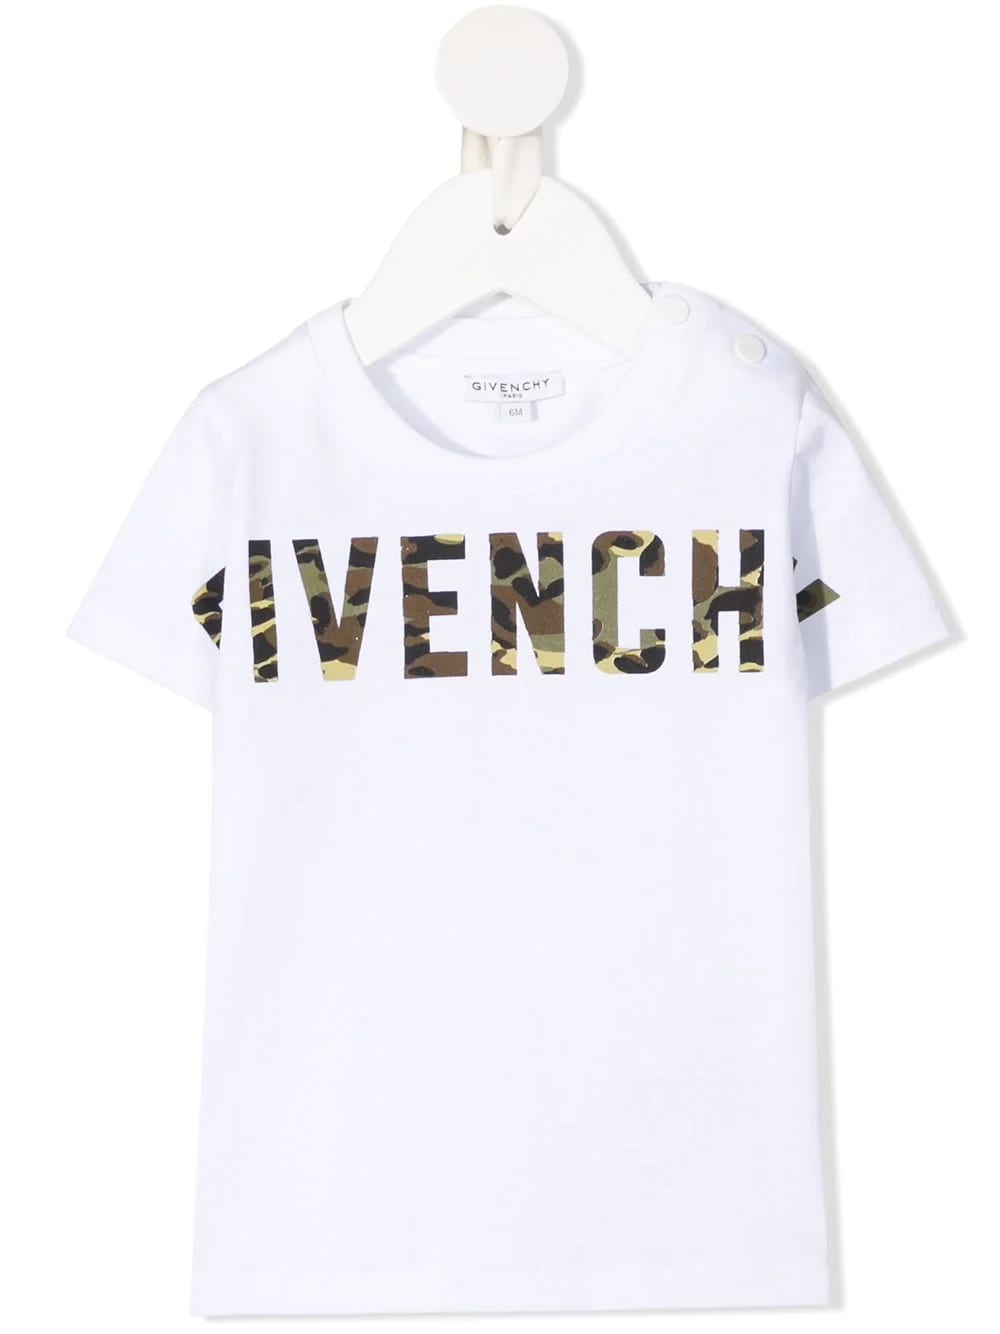 GIVENCHY WHITE NEWBORN T-SHIRT WITH CAMOUFLAGE GIVENCHY LETTERING,H05163 10B